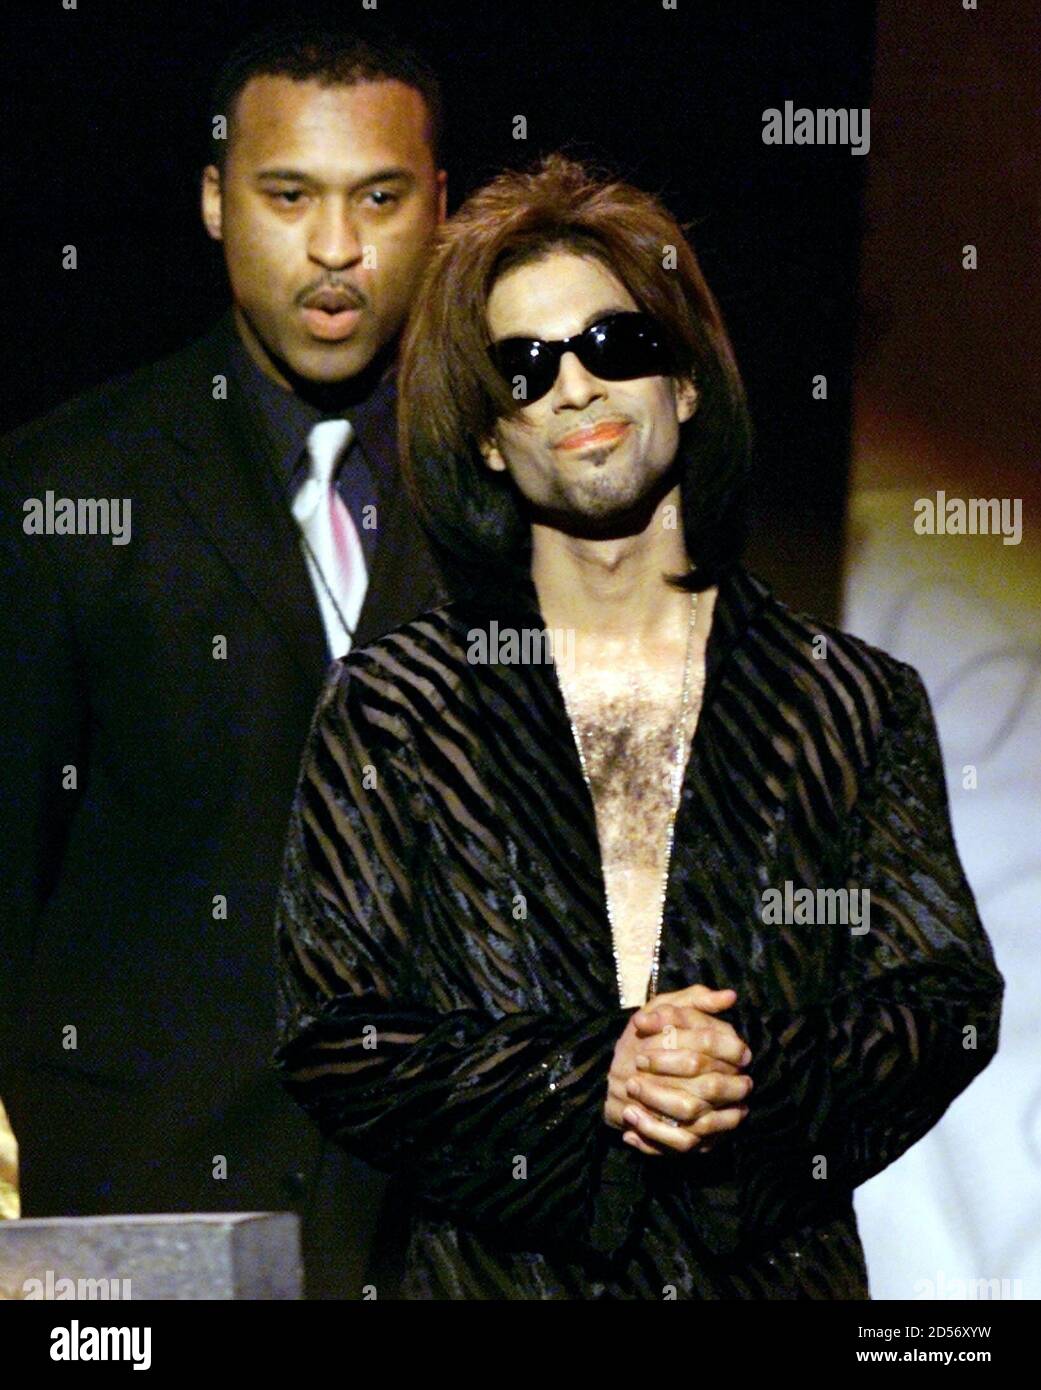 'The Artist' formerly known as Prince, accompanied by his bodyguard, listens to the applause of the crowd after being named Male Artist of the Decade at the 14th annual Soul Train Music Awards March 4. Stock Photo